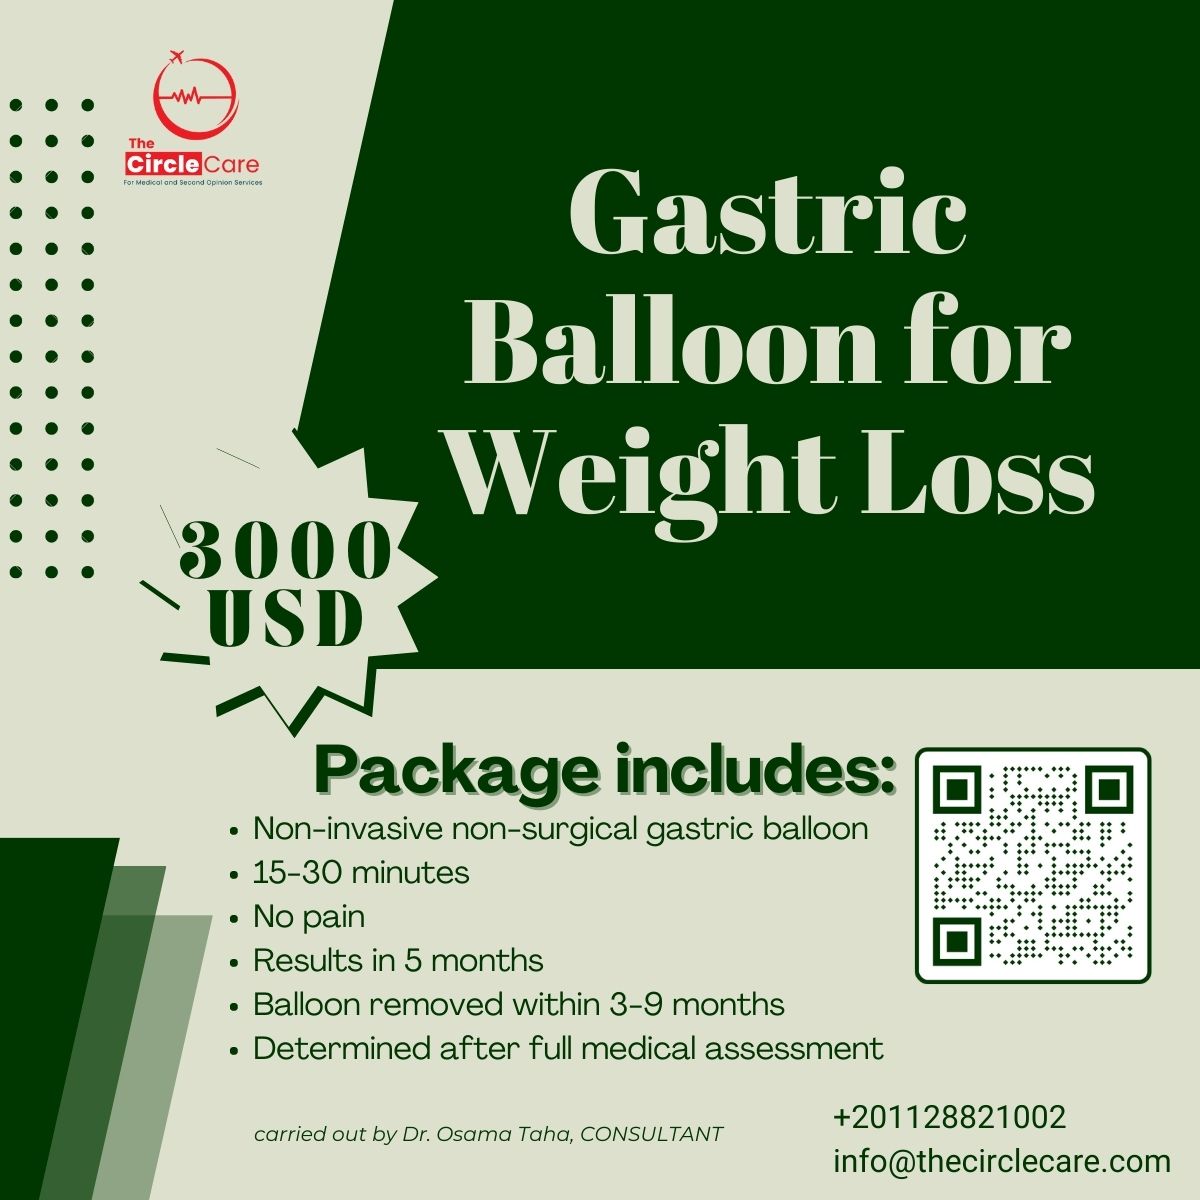 gastric-balloon-for-weight-loss-english-the-circle-care